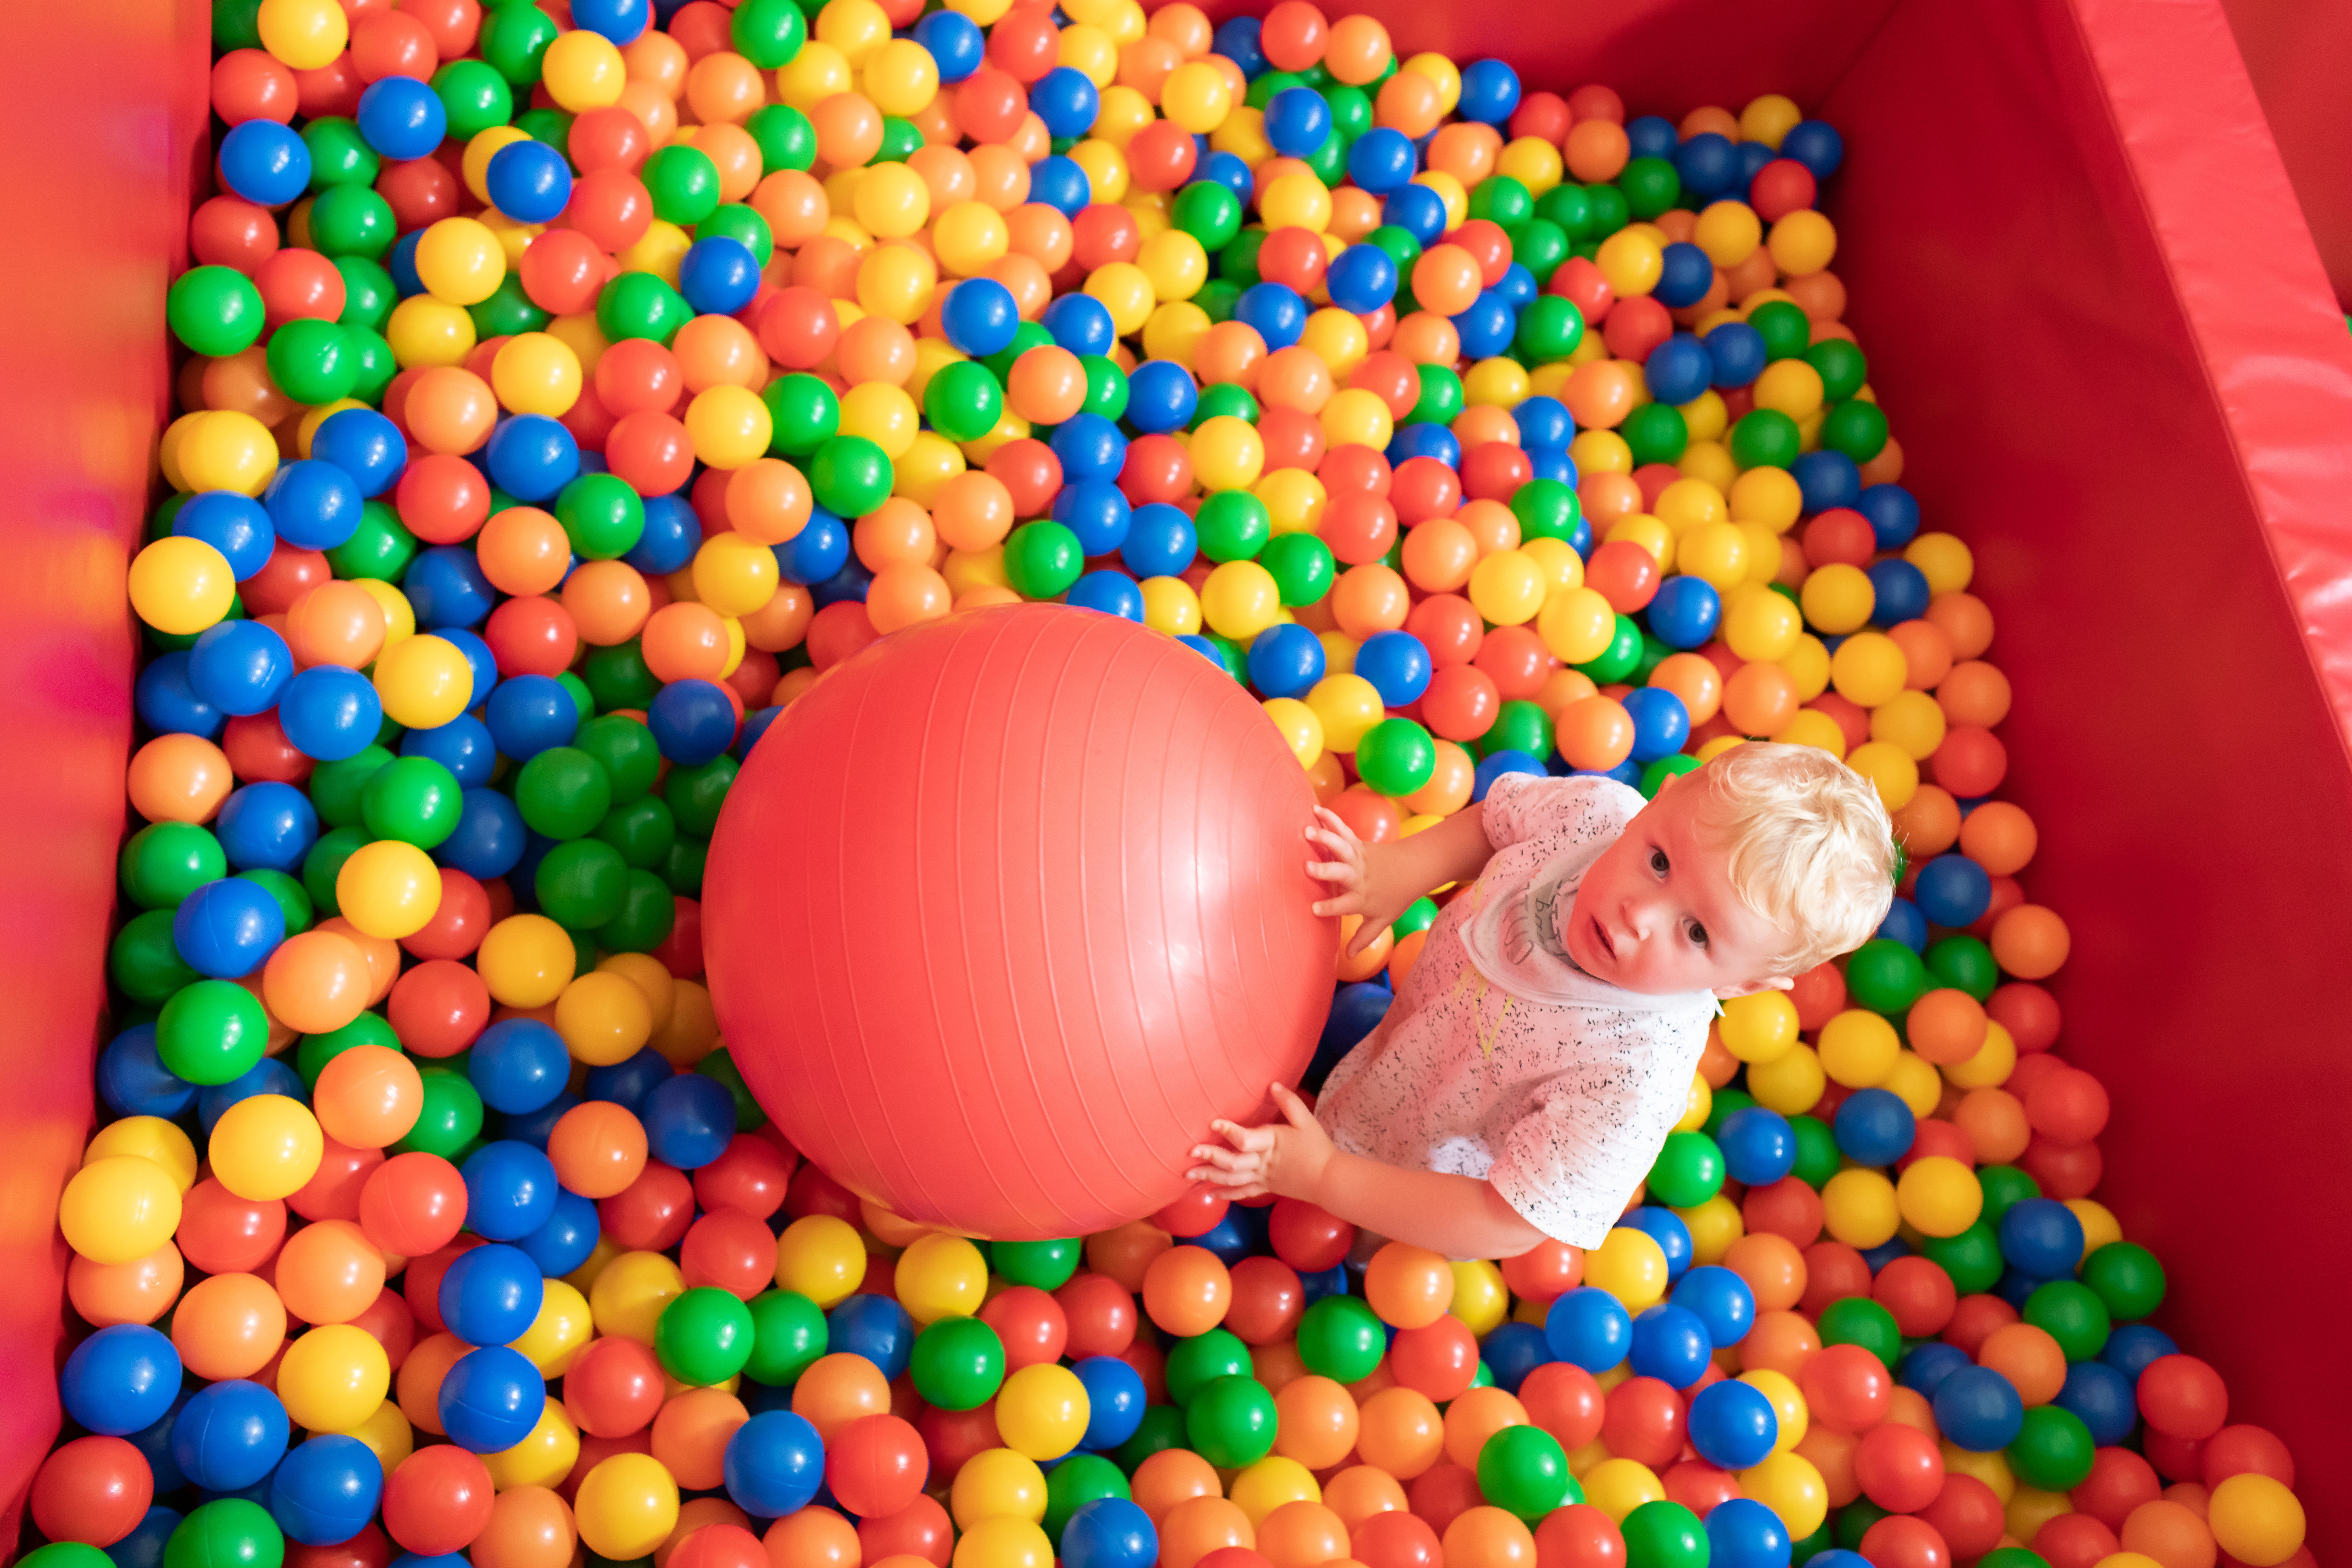 Ralph in the ball pit at Demelza Kent